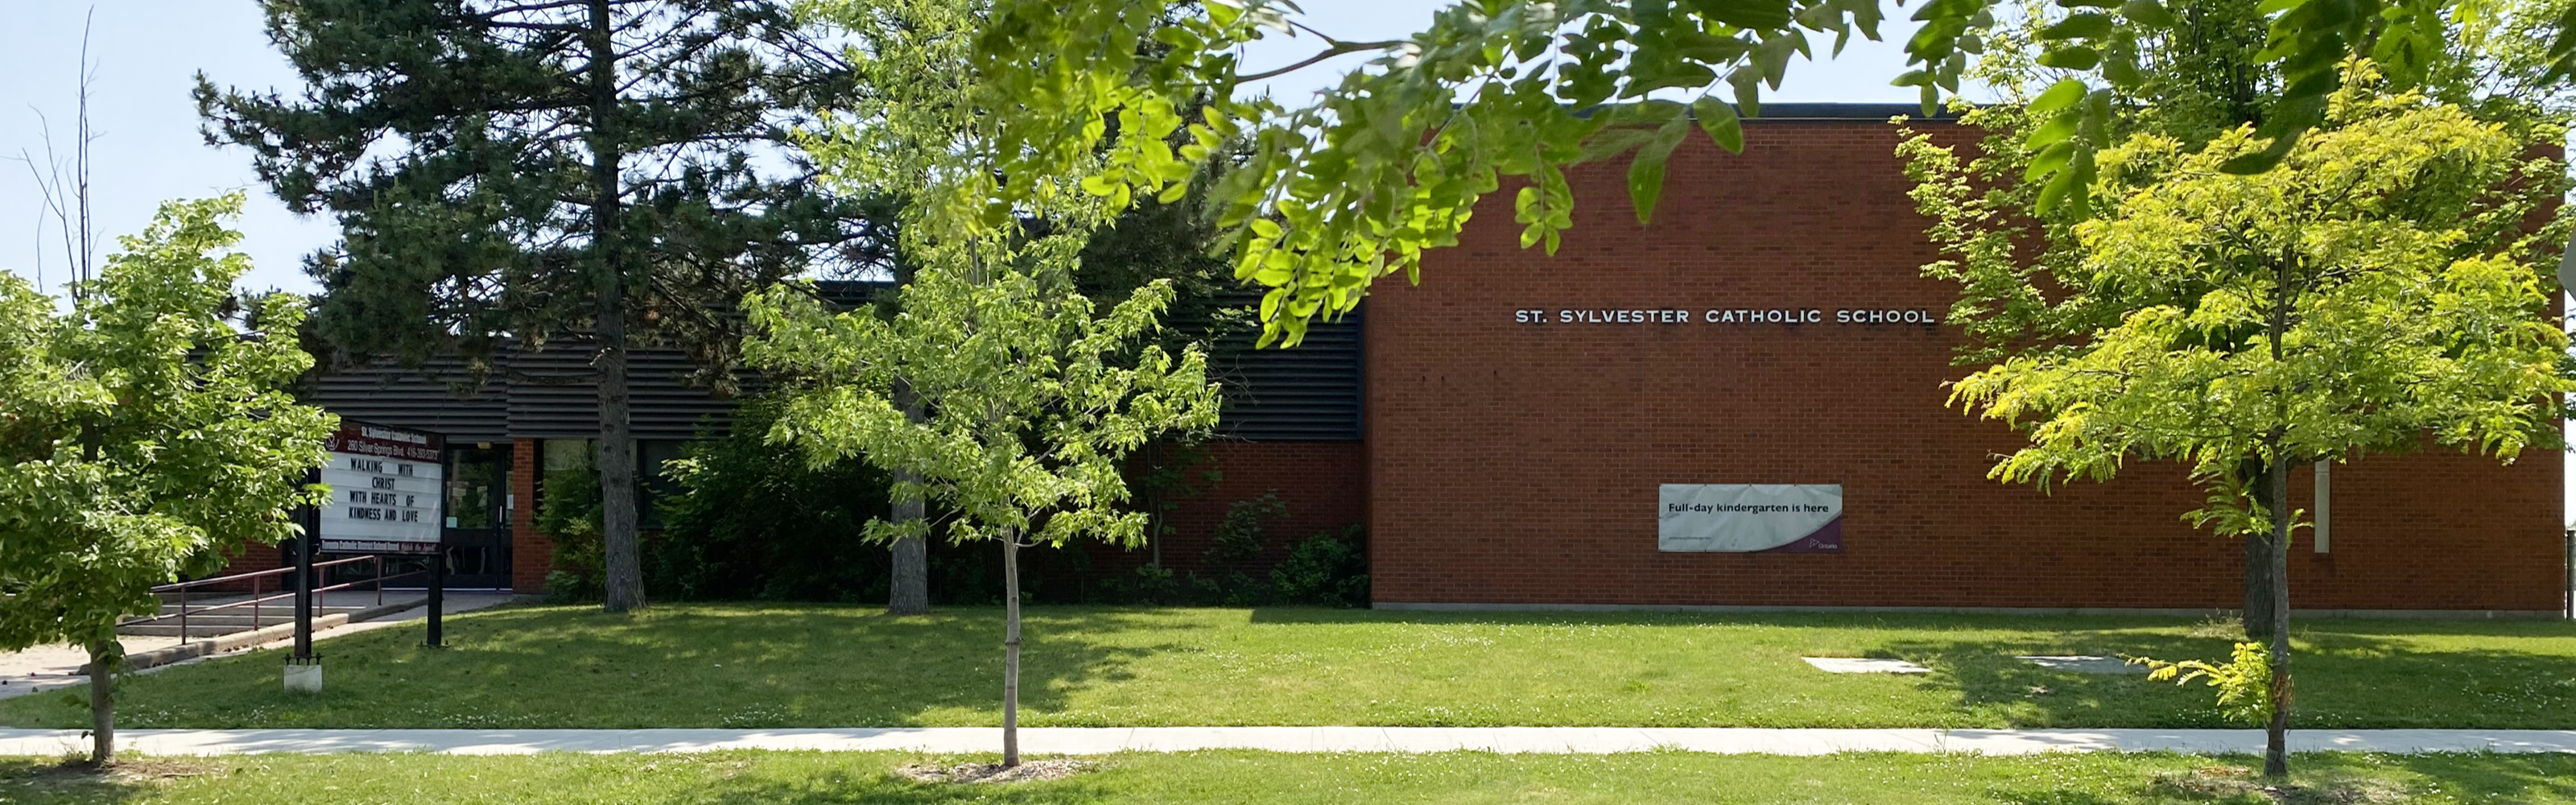 The front of the St. Sylvester Catholic School building.